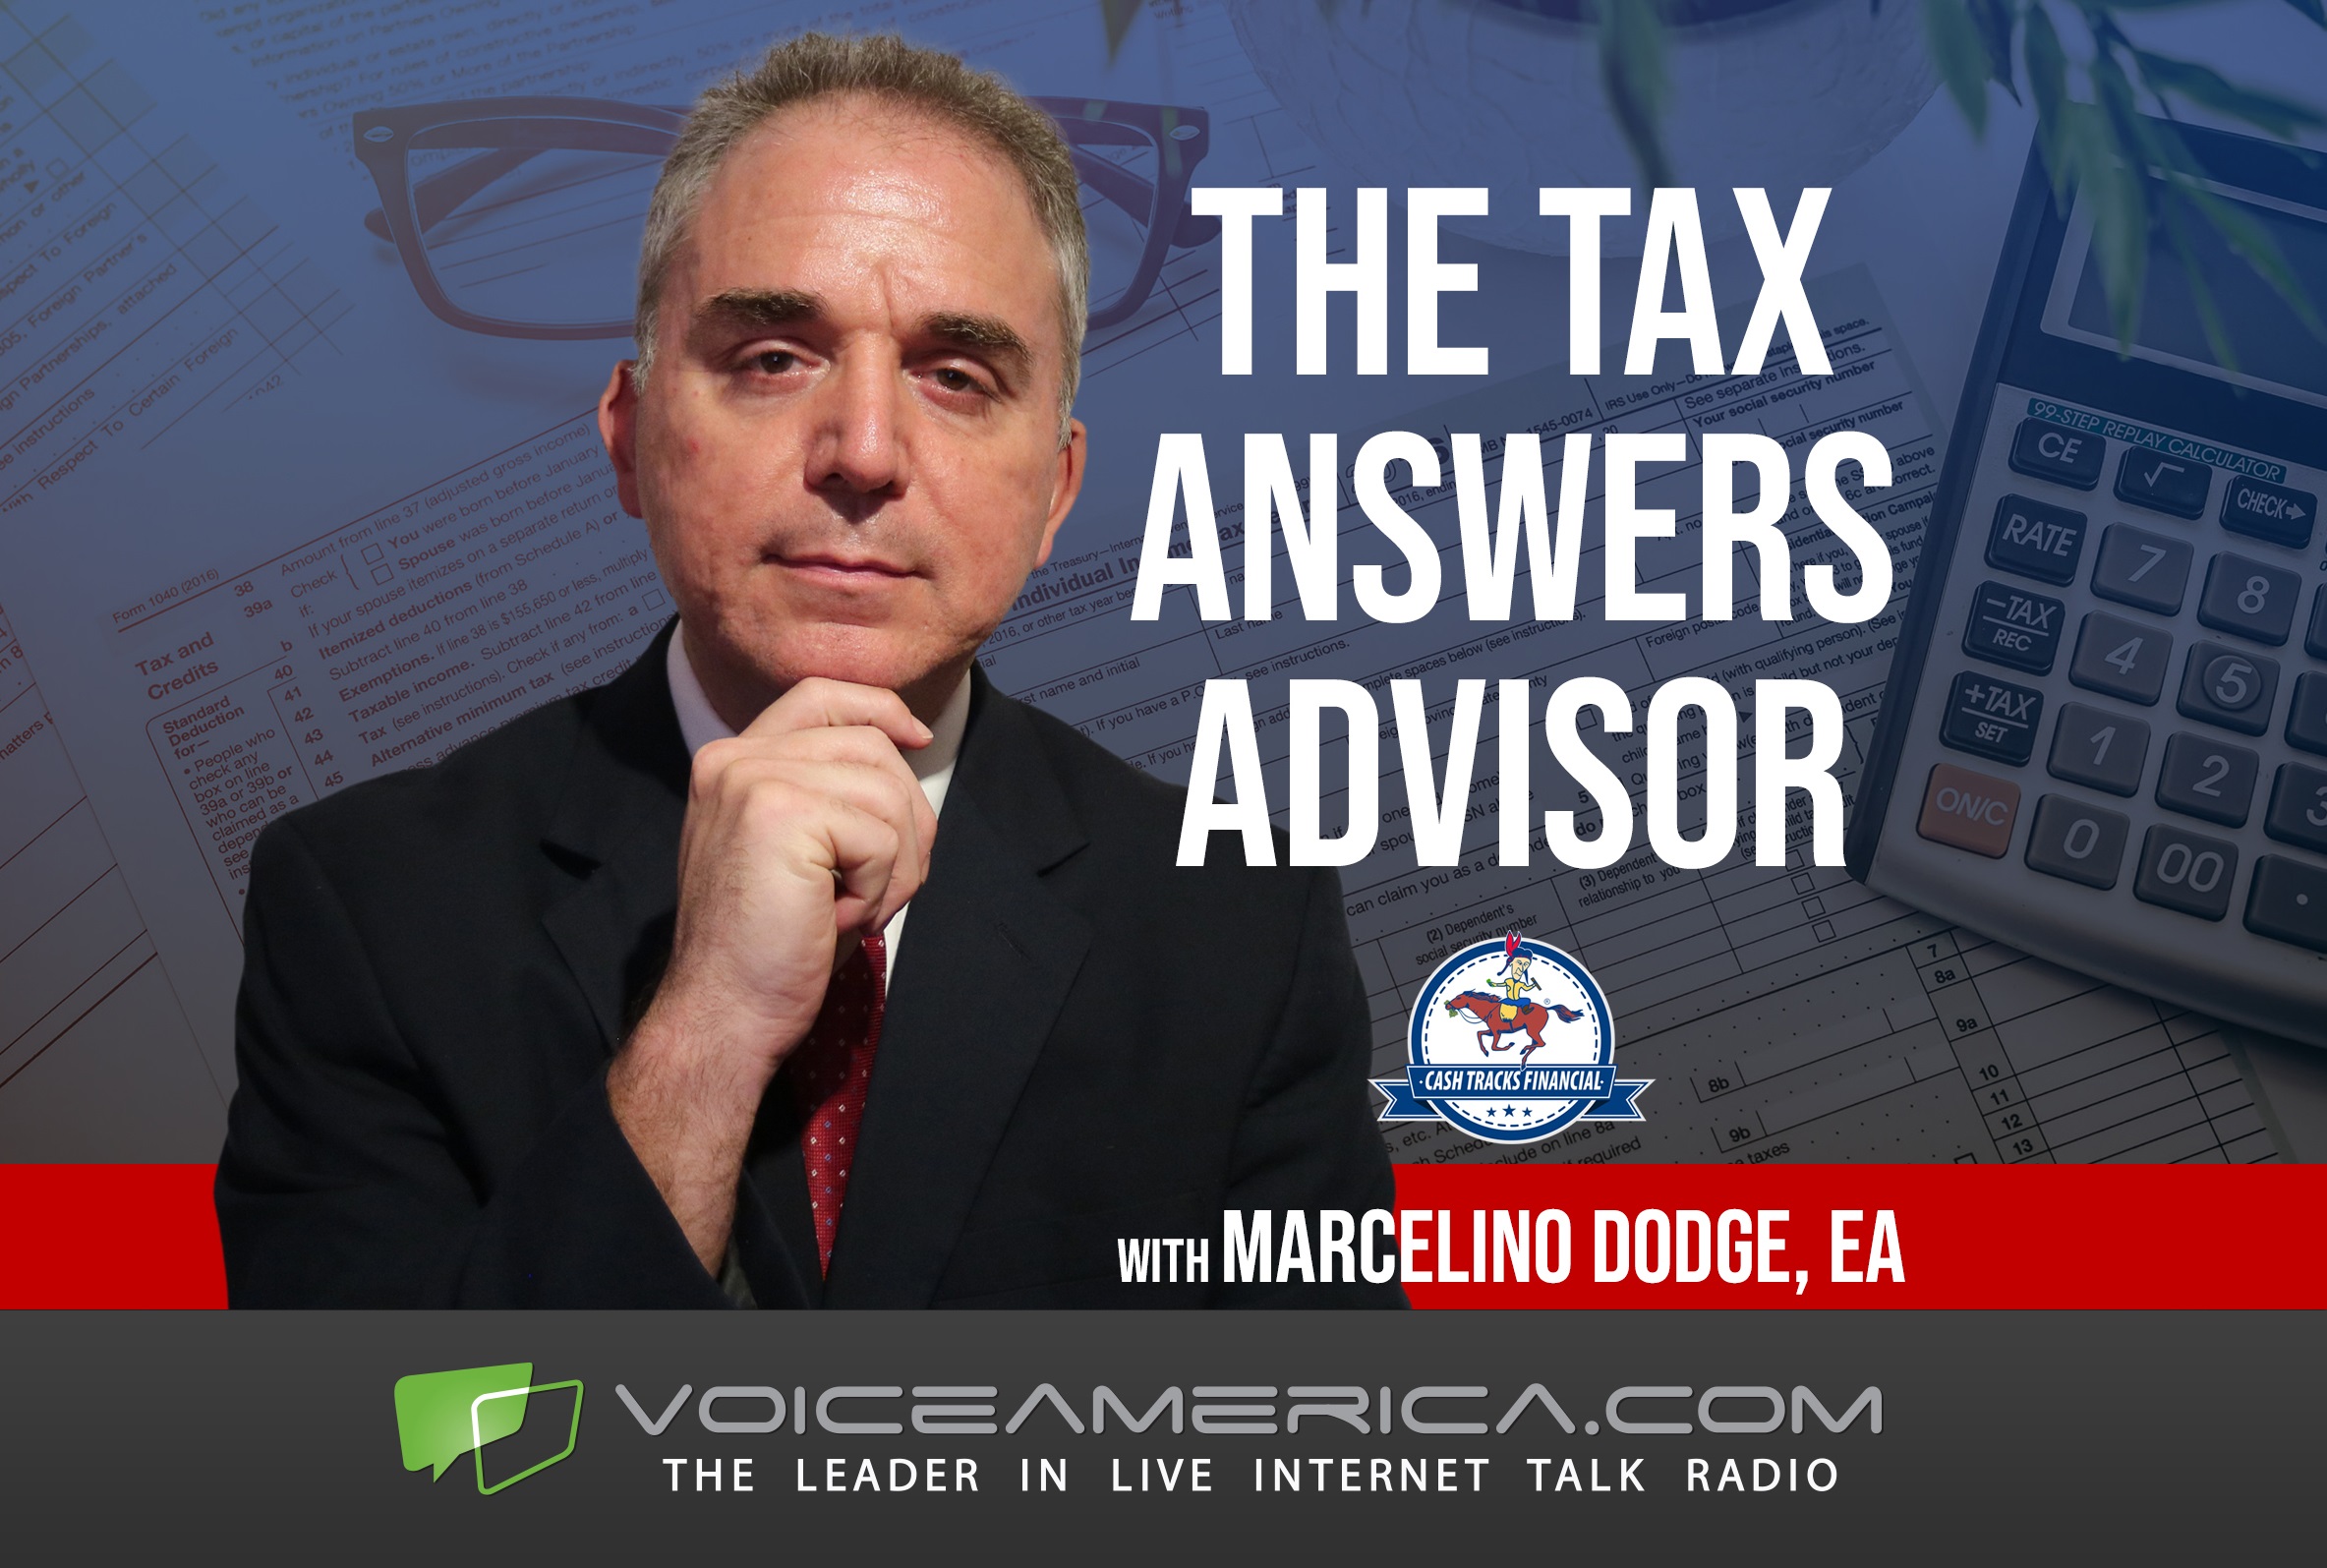 Tax Questions and Answers with The Tax Answers Advisor